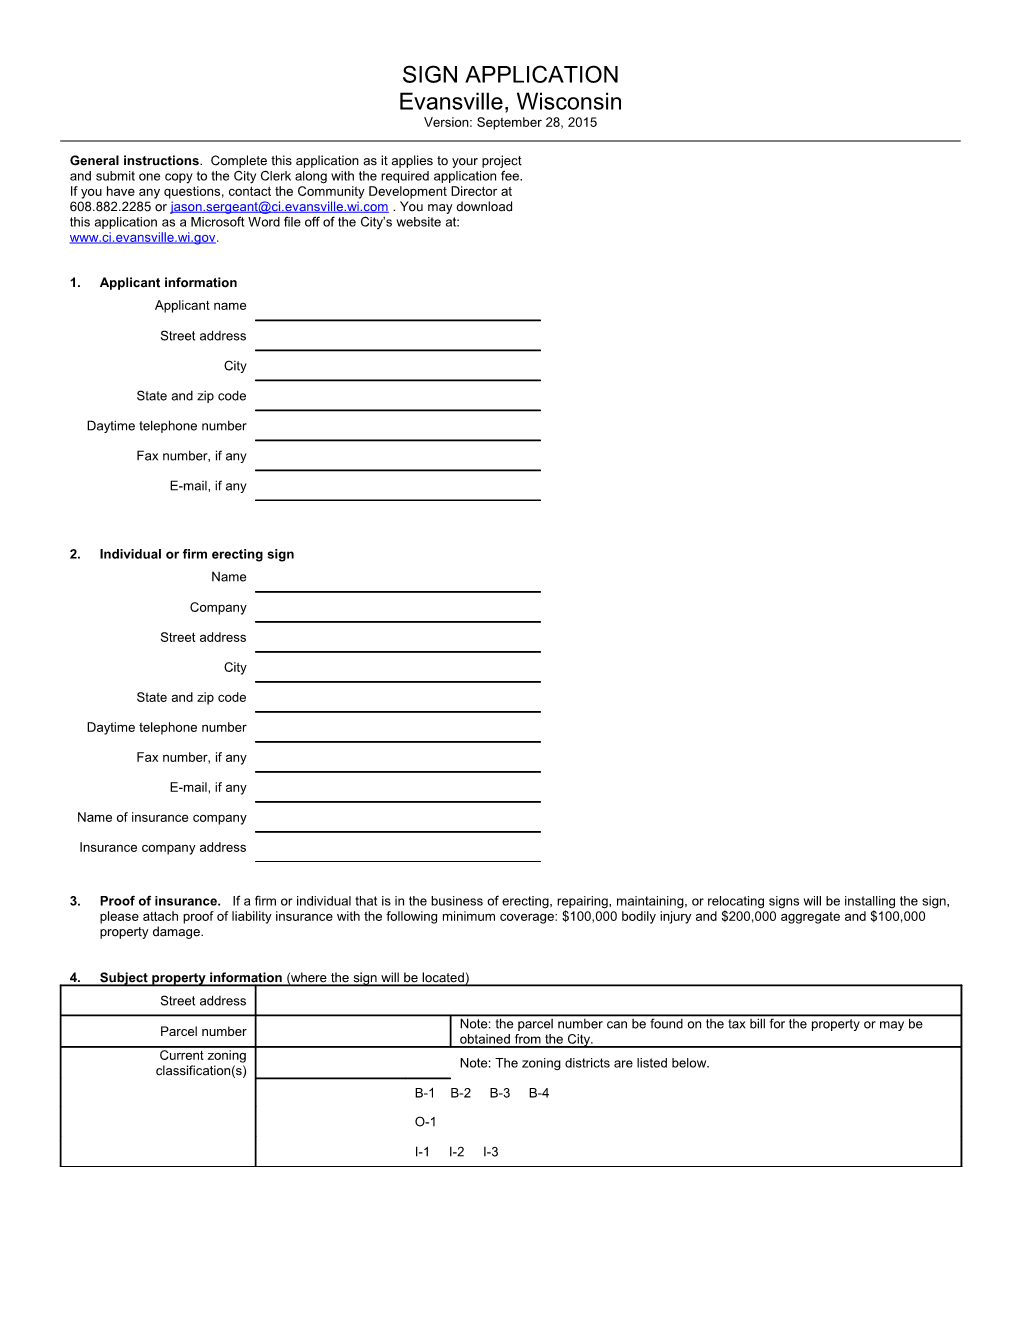 City of Evansville Application